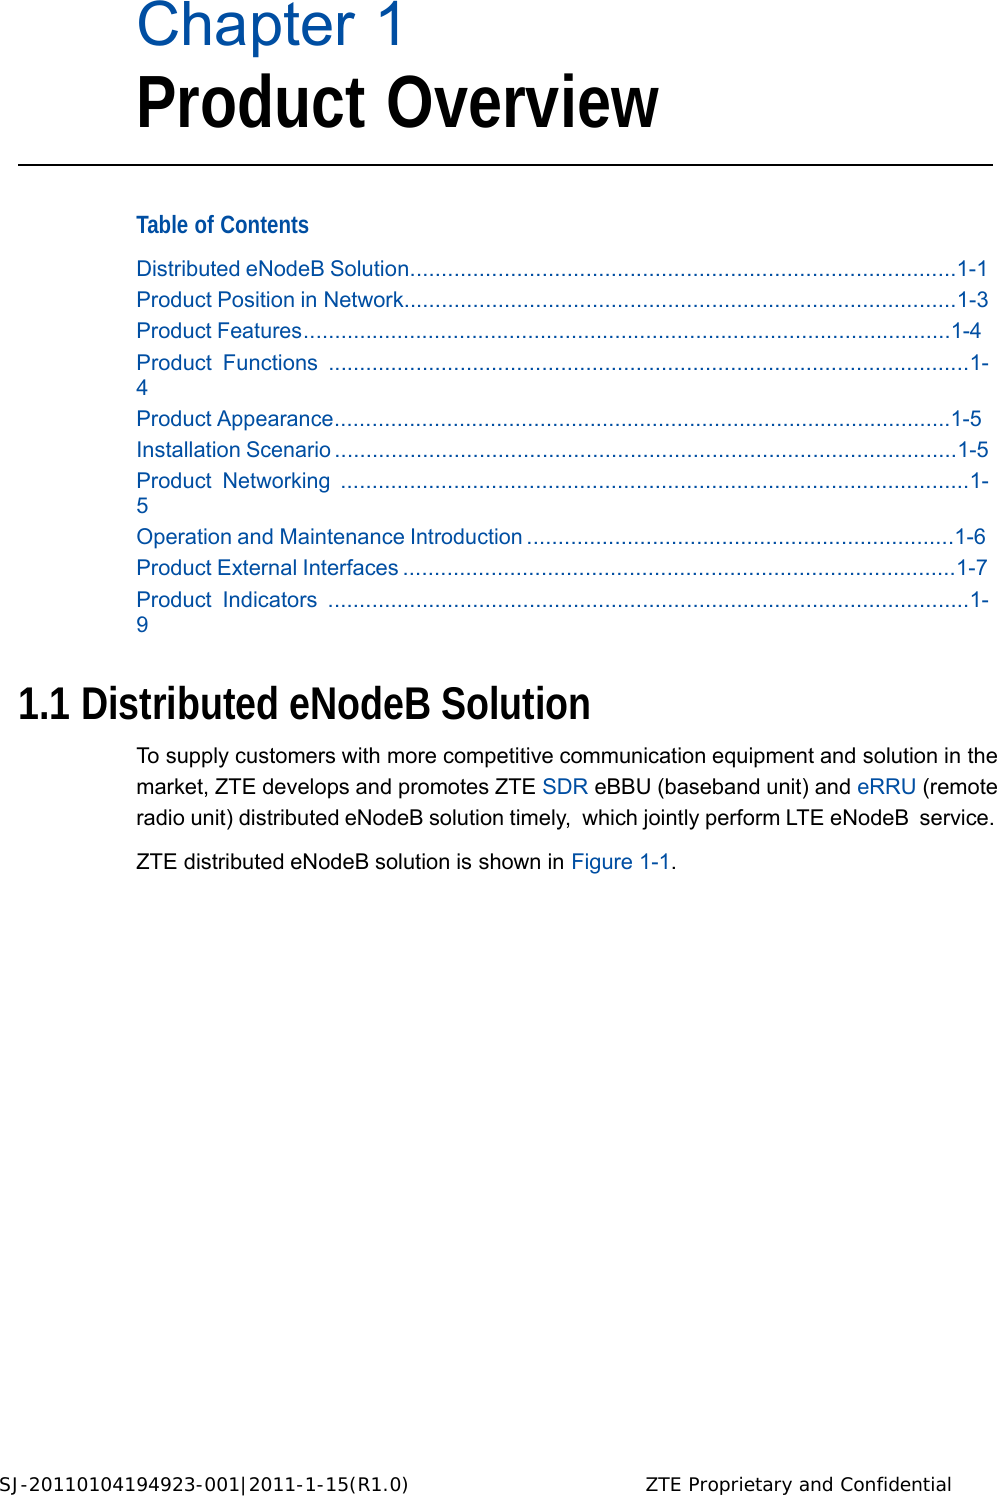 SJ-20110104194923-001|2011-1-15(R1.0) ZTE Proprietary and Confidential   Chapter 1 Product Overview    Table of Contents  Distributed eNodeB Solution.......................................................................................1-1 Product Position in Network........................................................................................1-3 Product Features........................................................................................................1-4 Product Functions ......................................................................................................1-4 Product Appearance...................................................................................................1-5 Installation Scenario ...................................................................................................1-5 Product Networking ....................................................................................................1-5 Operation and Maintenance Introduction ....................................................................1-6 Product External Interfaces ........................................................................................1-7 Product Indicators ......................................................................................................1-9   1.1 Distributed eNodeB Solution  To supply customers with more competitive communication equipment and solution in the market, ZTE develops and promotes ZTE SDR eBBU (baseband unit) and eRRU (remote radio unit) distributed eNodeB solution timely,  which jointly perform LTE eNodeB  service.  ZTE distributed eNodeB solution is shown in Figure 1-1.                              